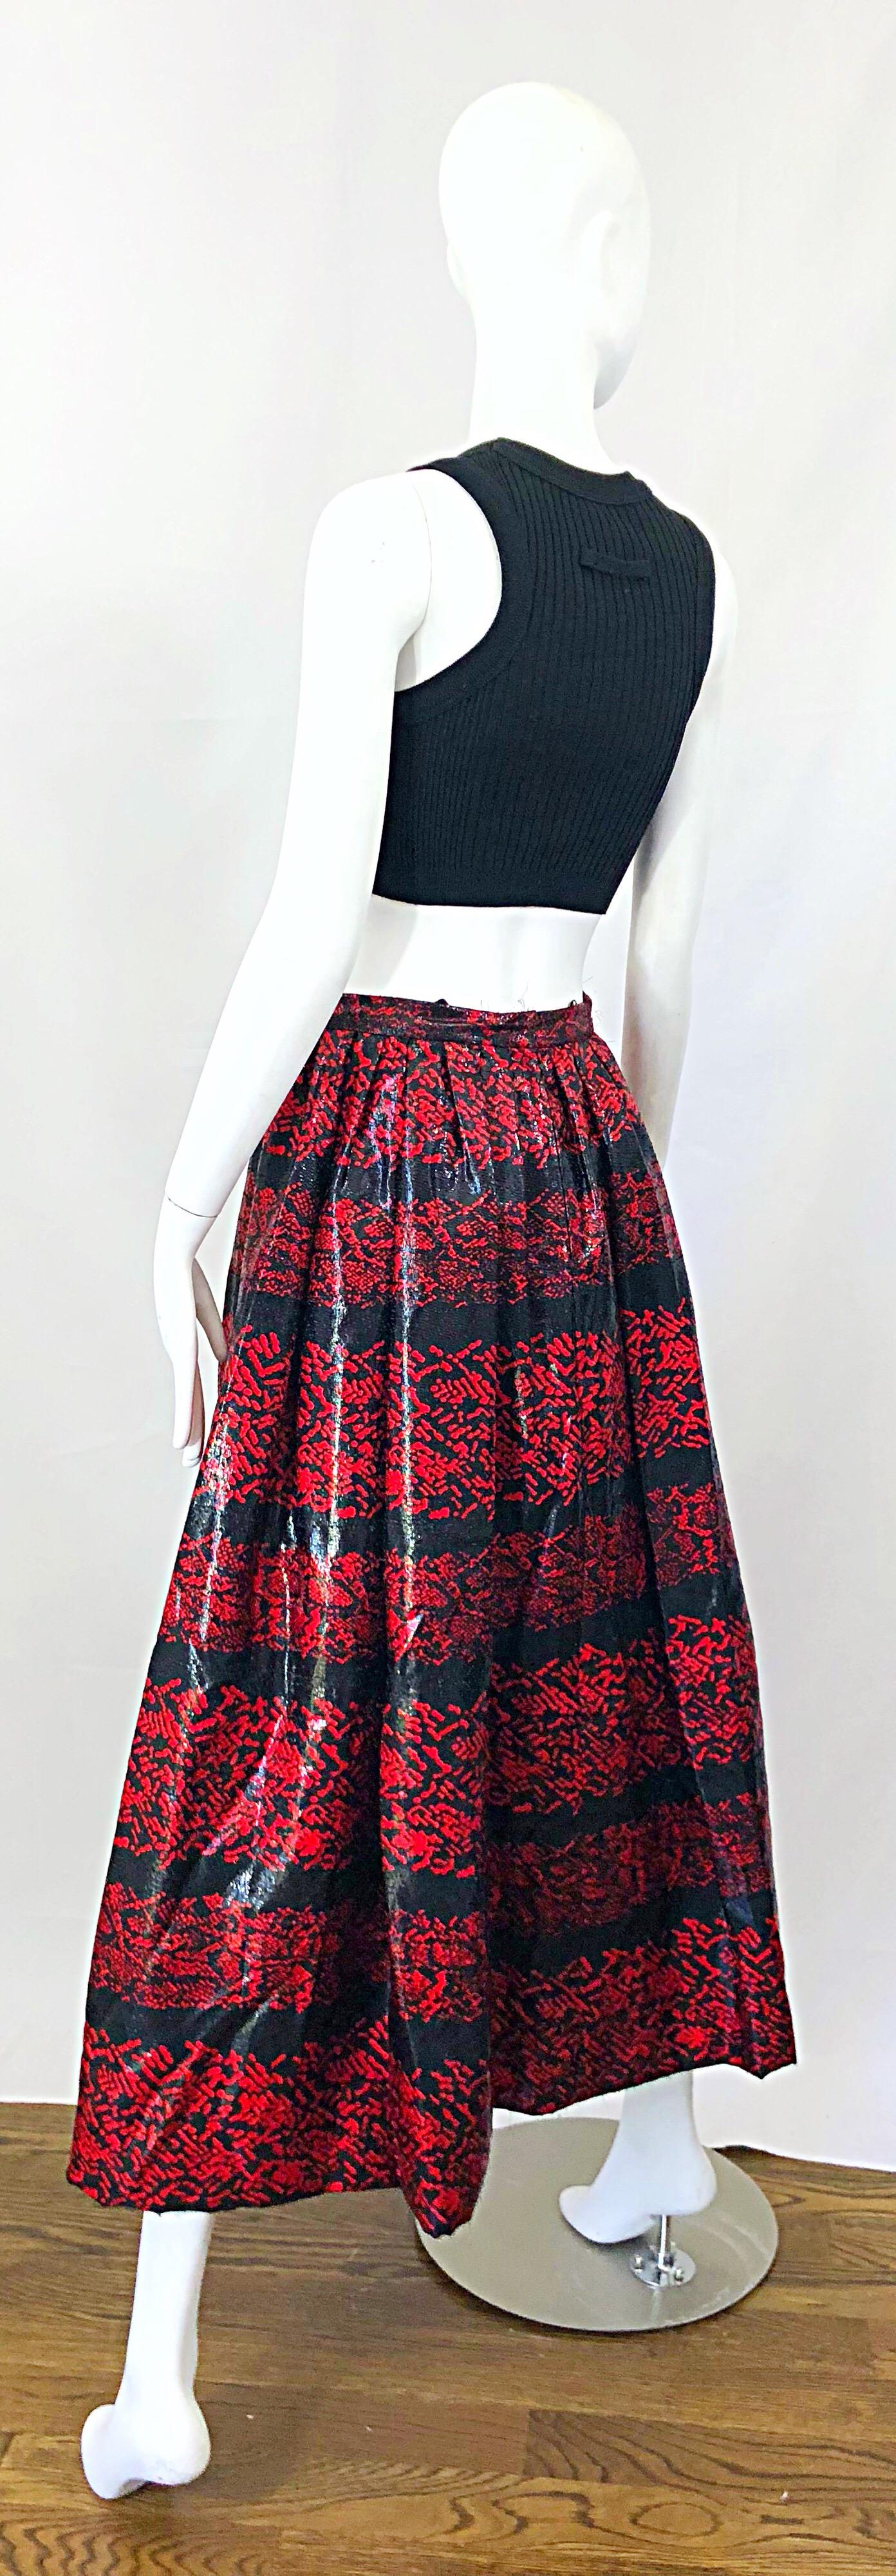 Rare Vintage Tarquin Ebker Couture Red + Black Metallic Threaded Silk Midi Skirt In Excellent Condition For Sale In San Diego, CA